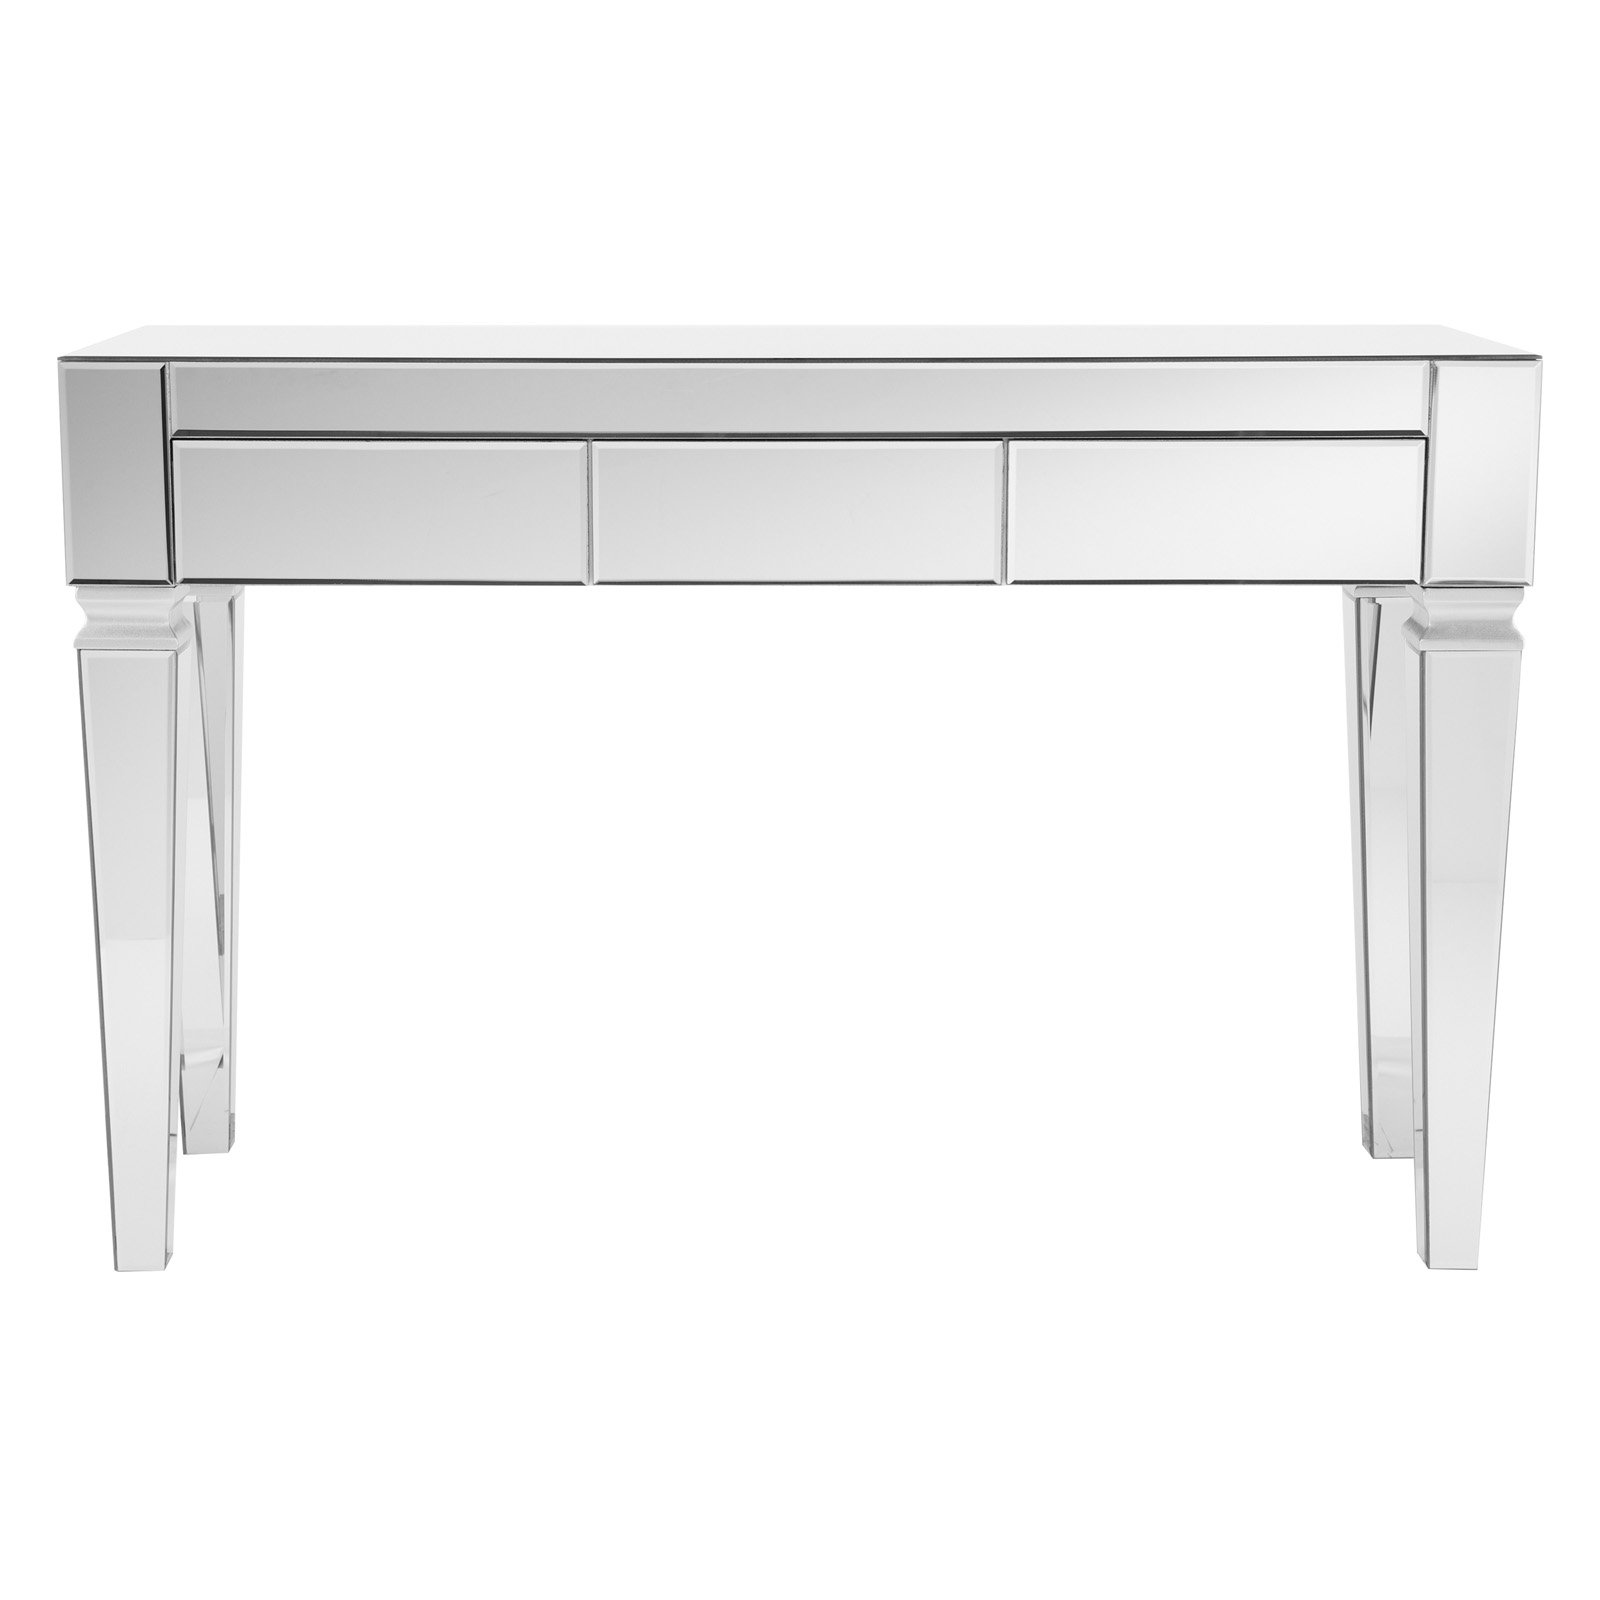 46" Clear and Silver Contemporary Beveled Mirror Rectangular Top Console Table - image 3 of 10